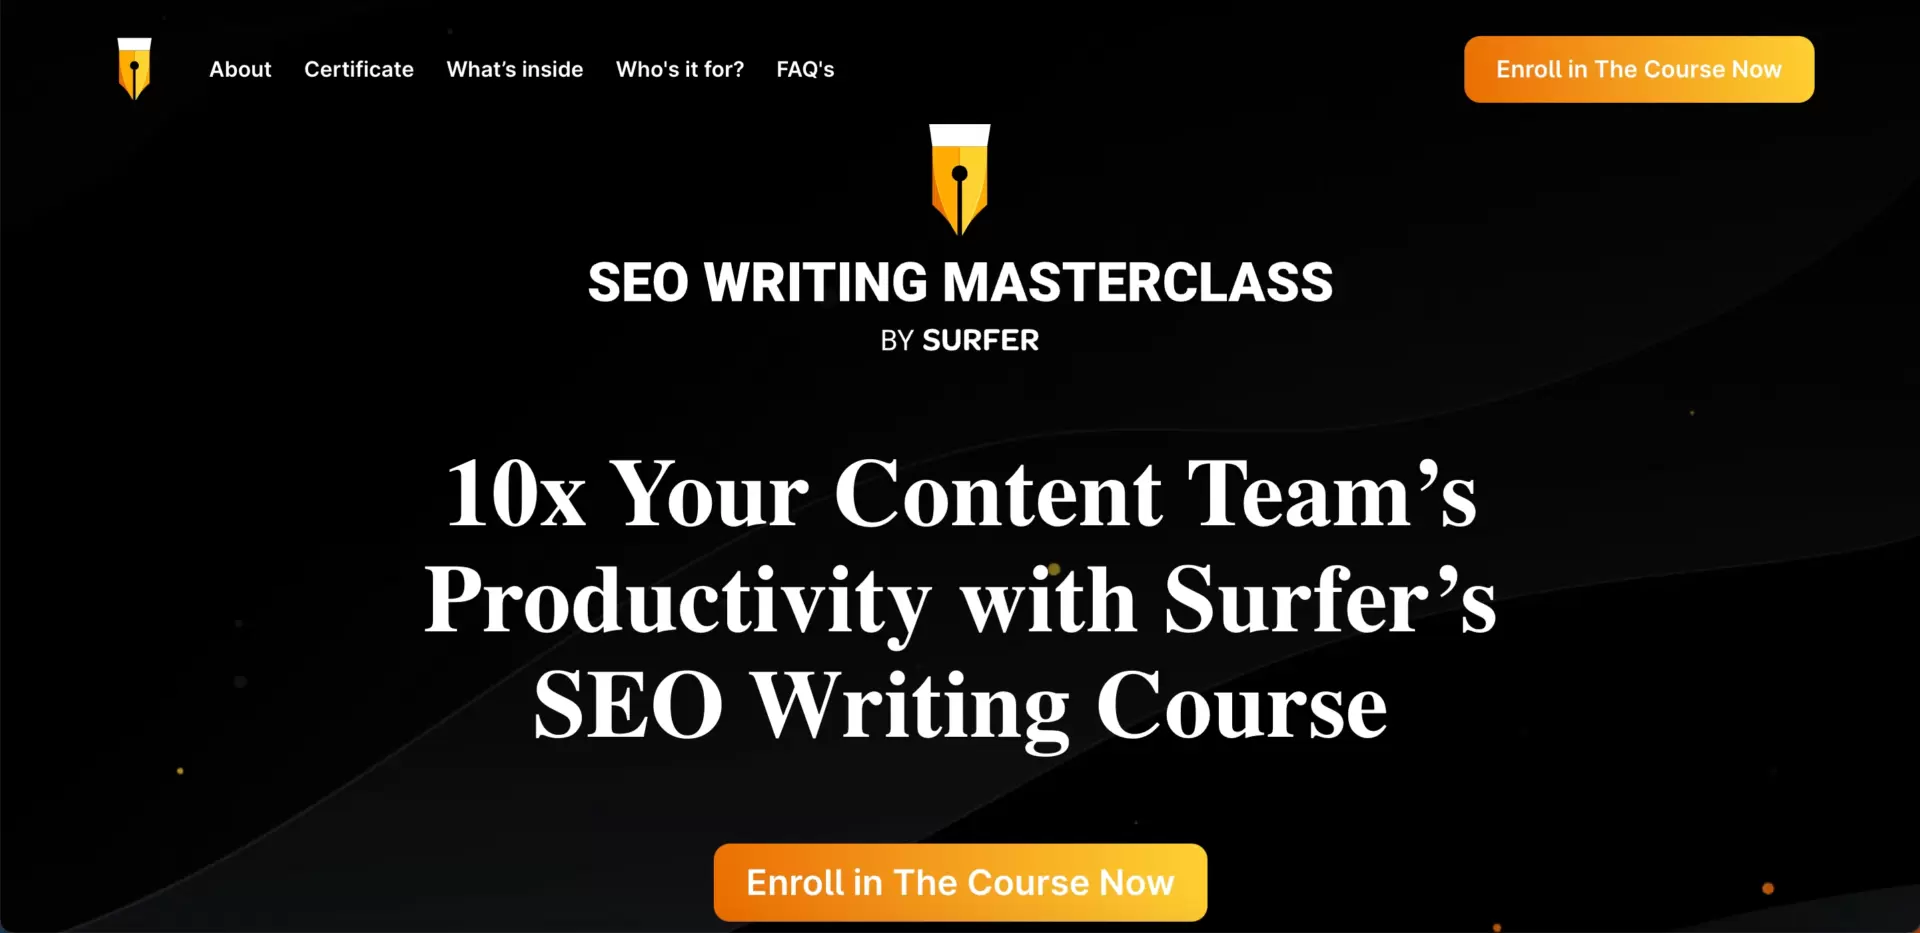 conversion rate optimization course on SEO writing